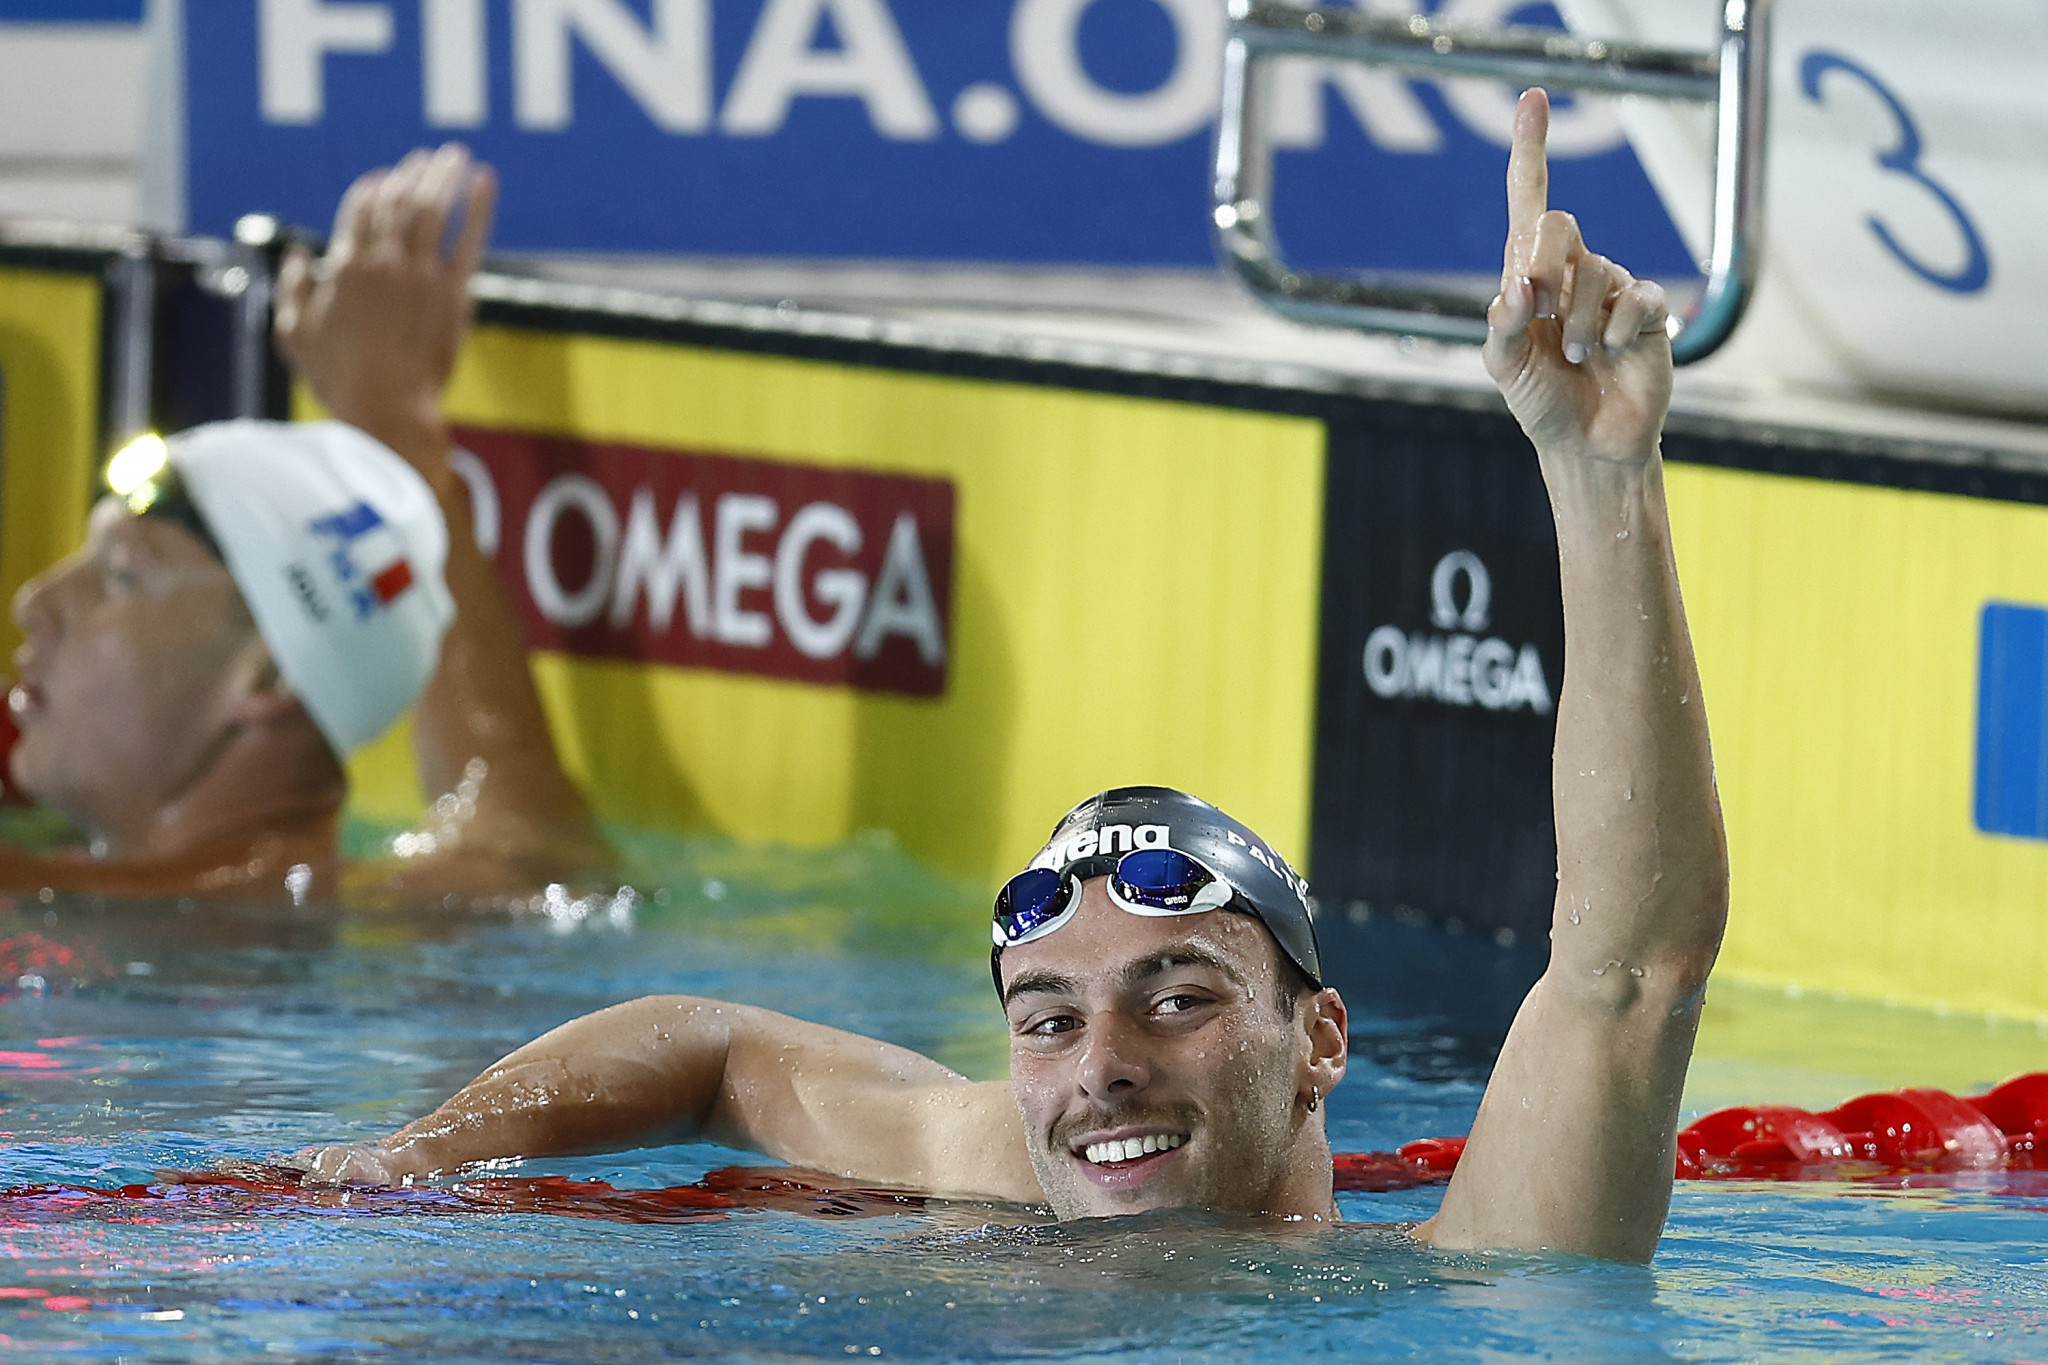 Gregorio Paltrinieri proved too strong as he swept to the men's 1500m freestyle title ©Getty Images